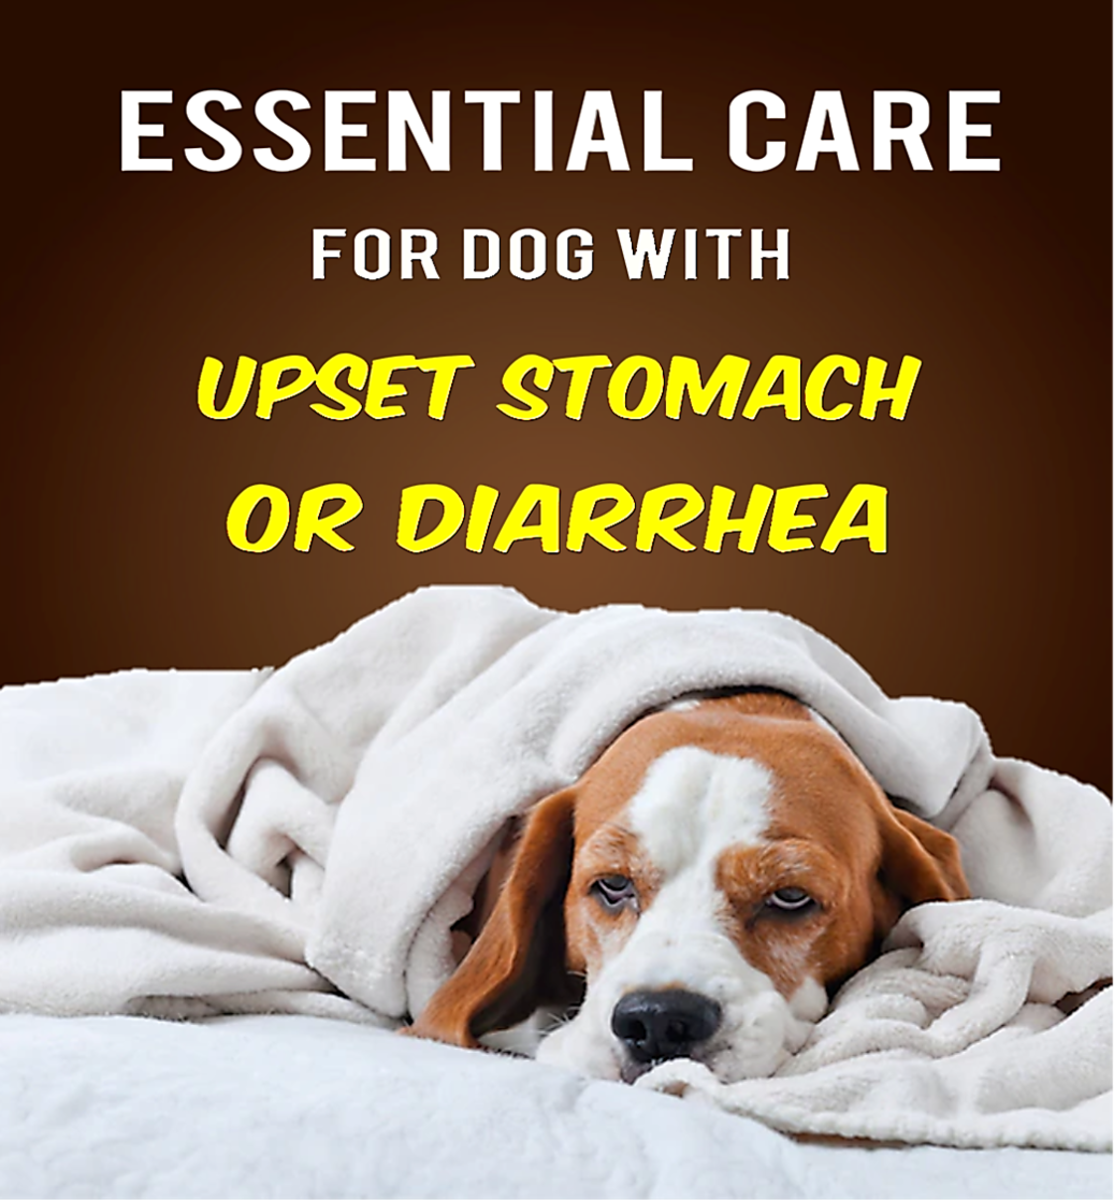 Care for Dog with Upset Stomach or Diarrhea